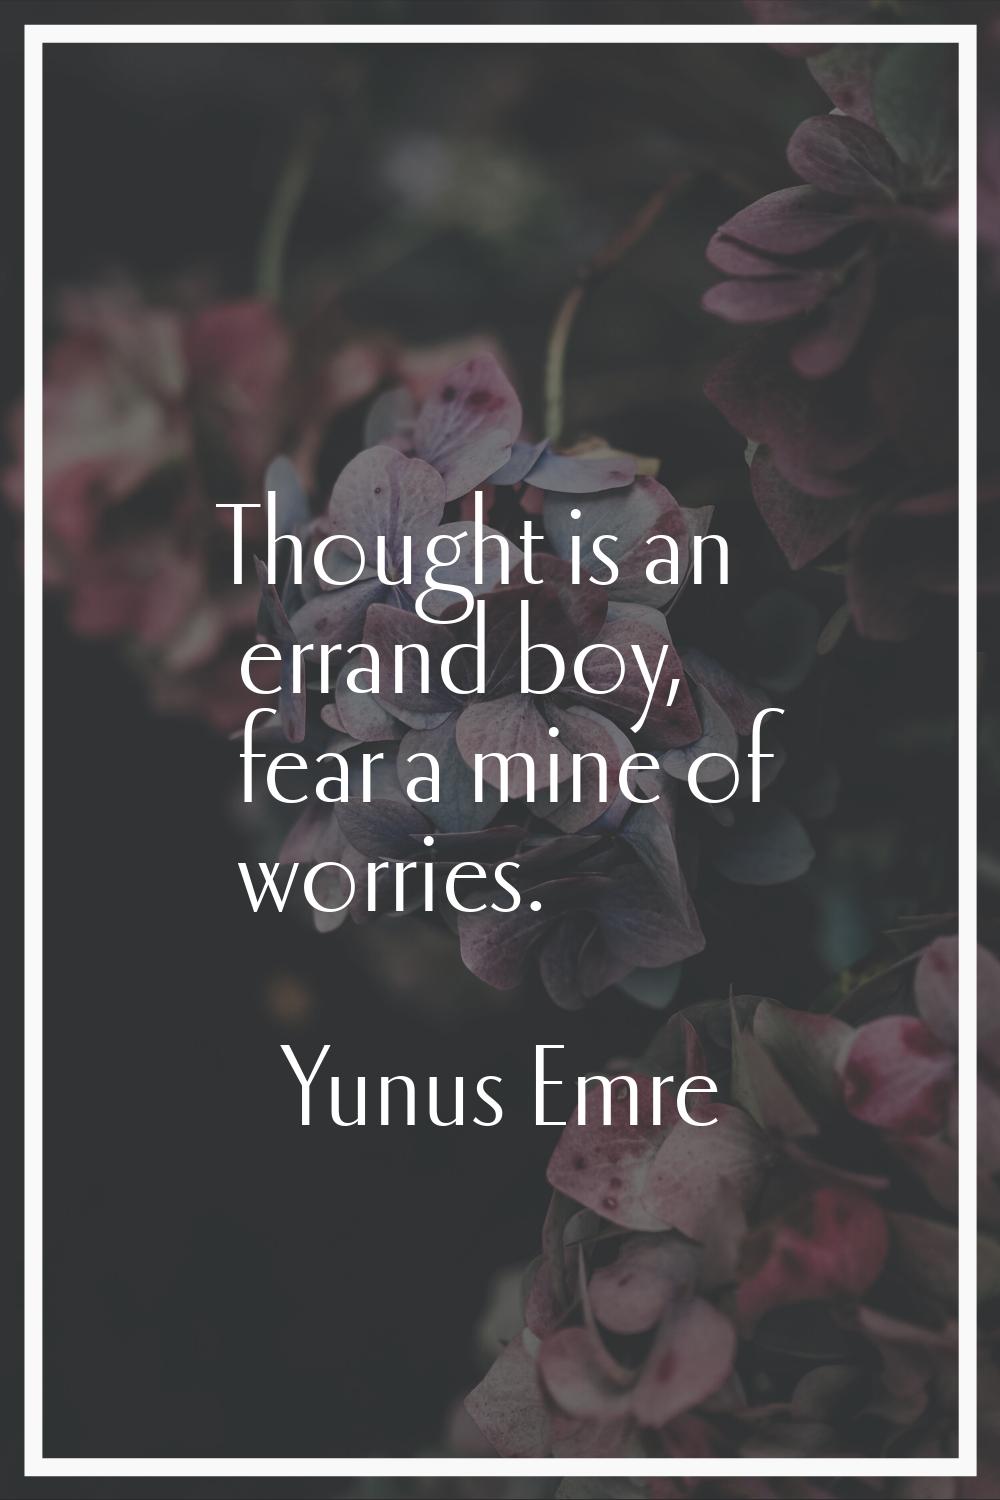 Thought is an errand boy, fear a mine of worries.